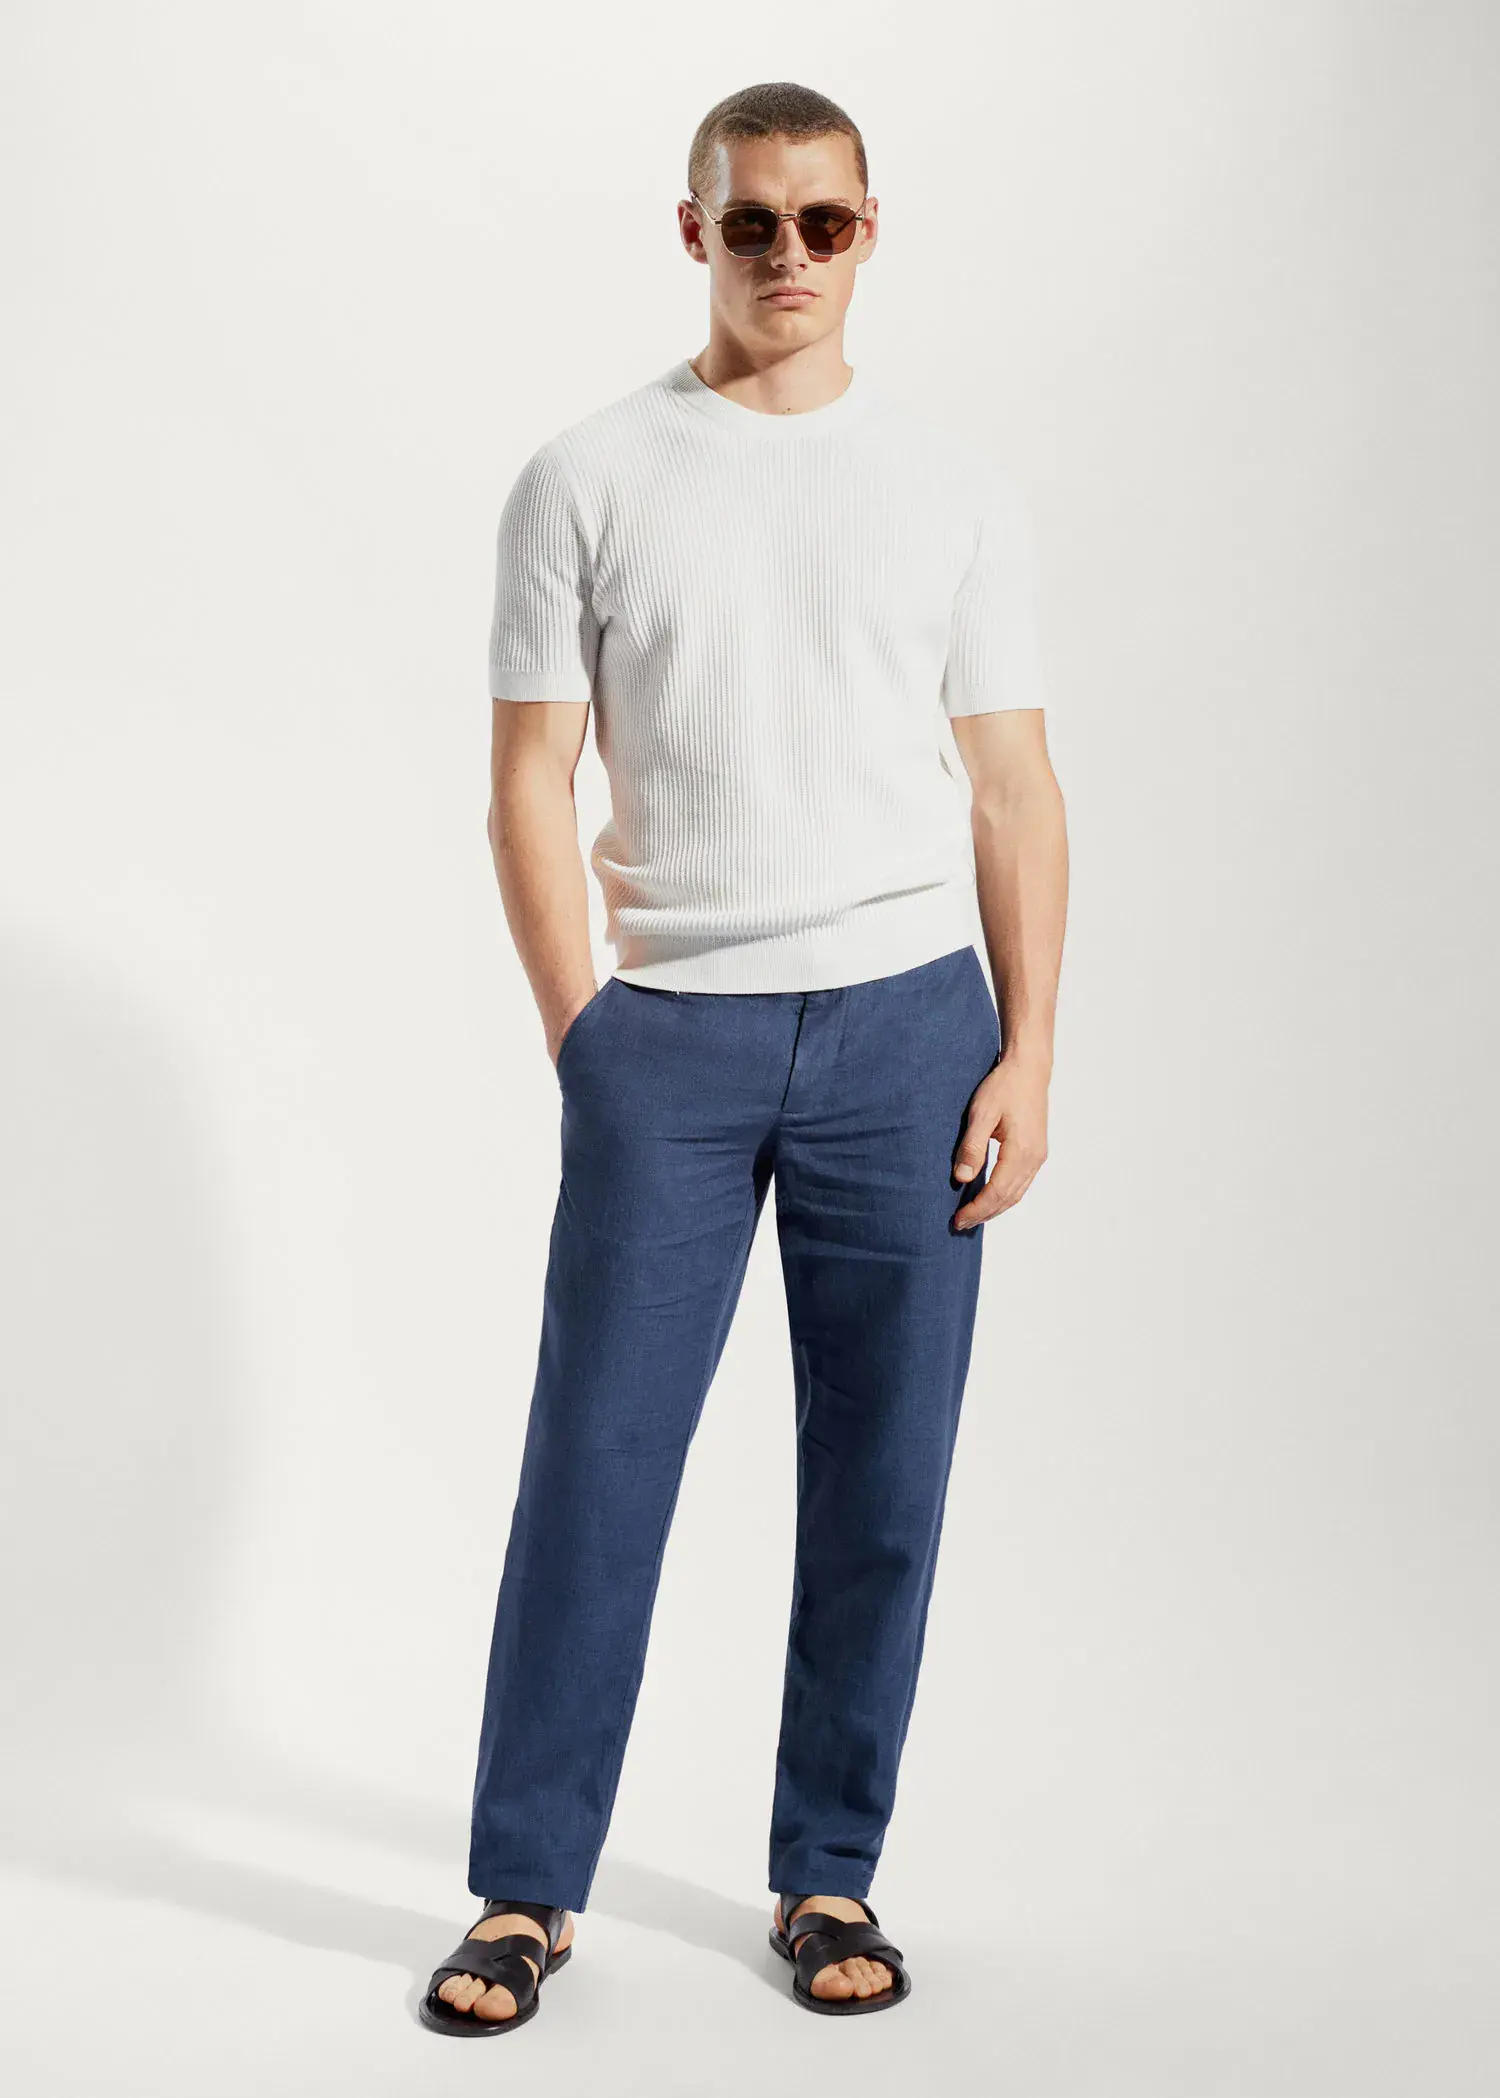 Mango Slim-fit 100% linen pants. a man standing with his hands in his pockets. 